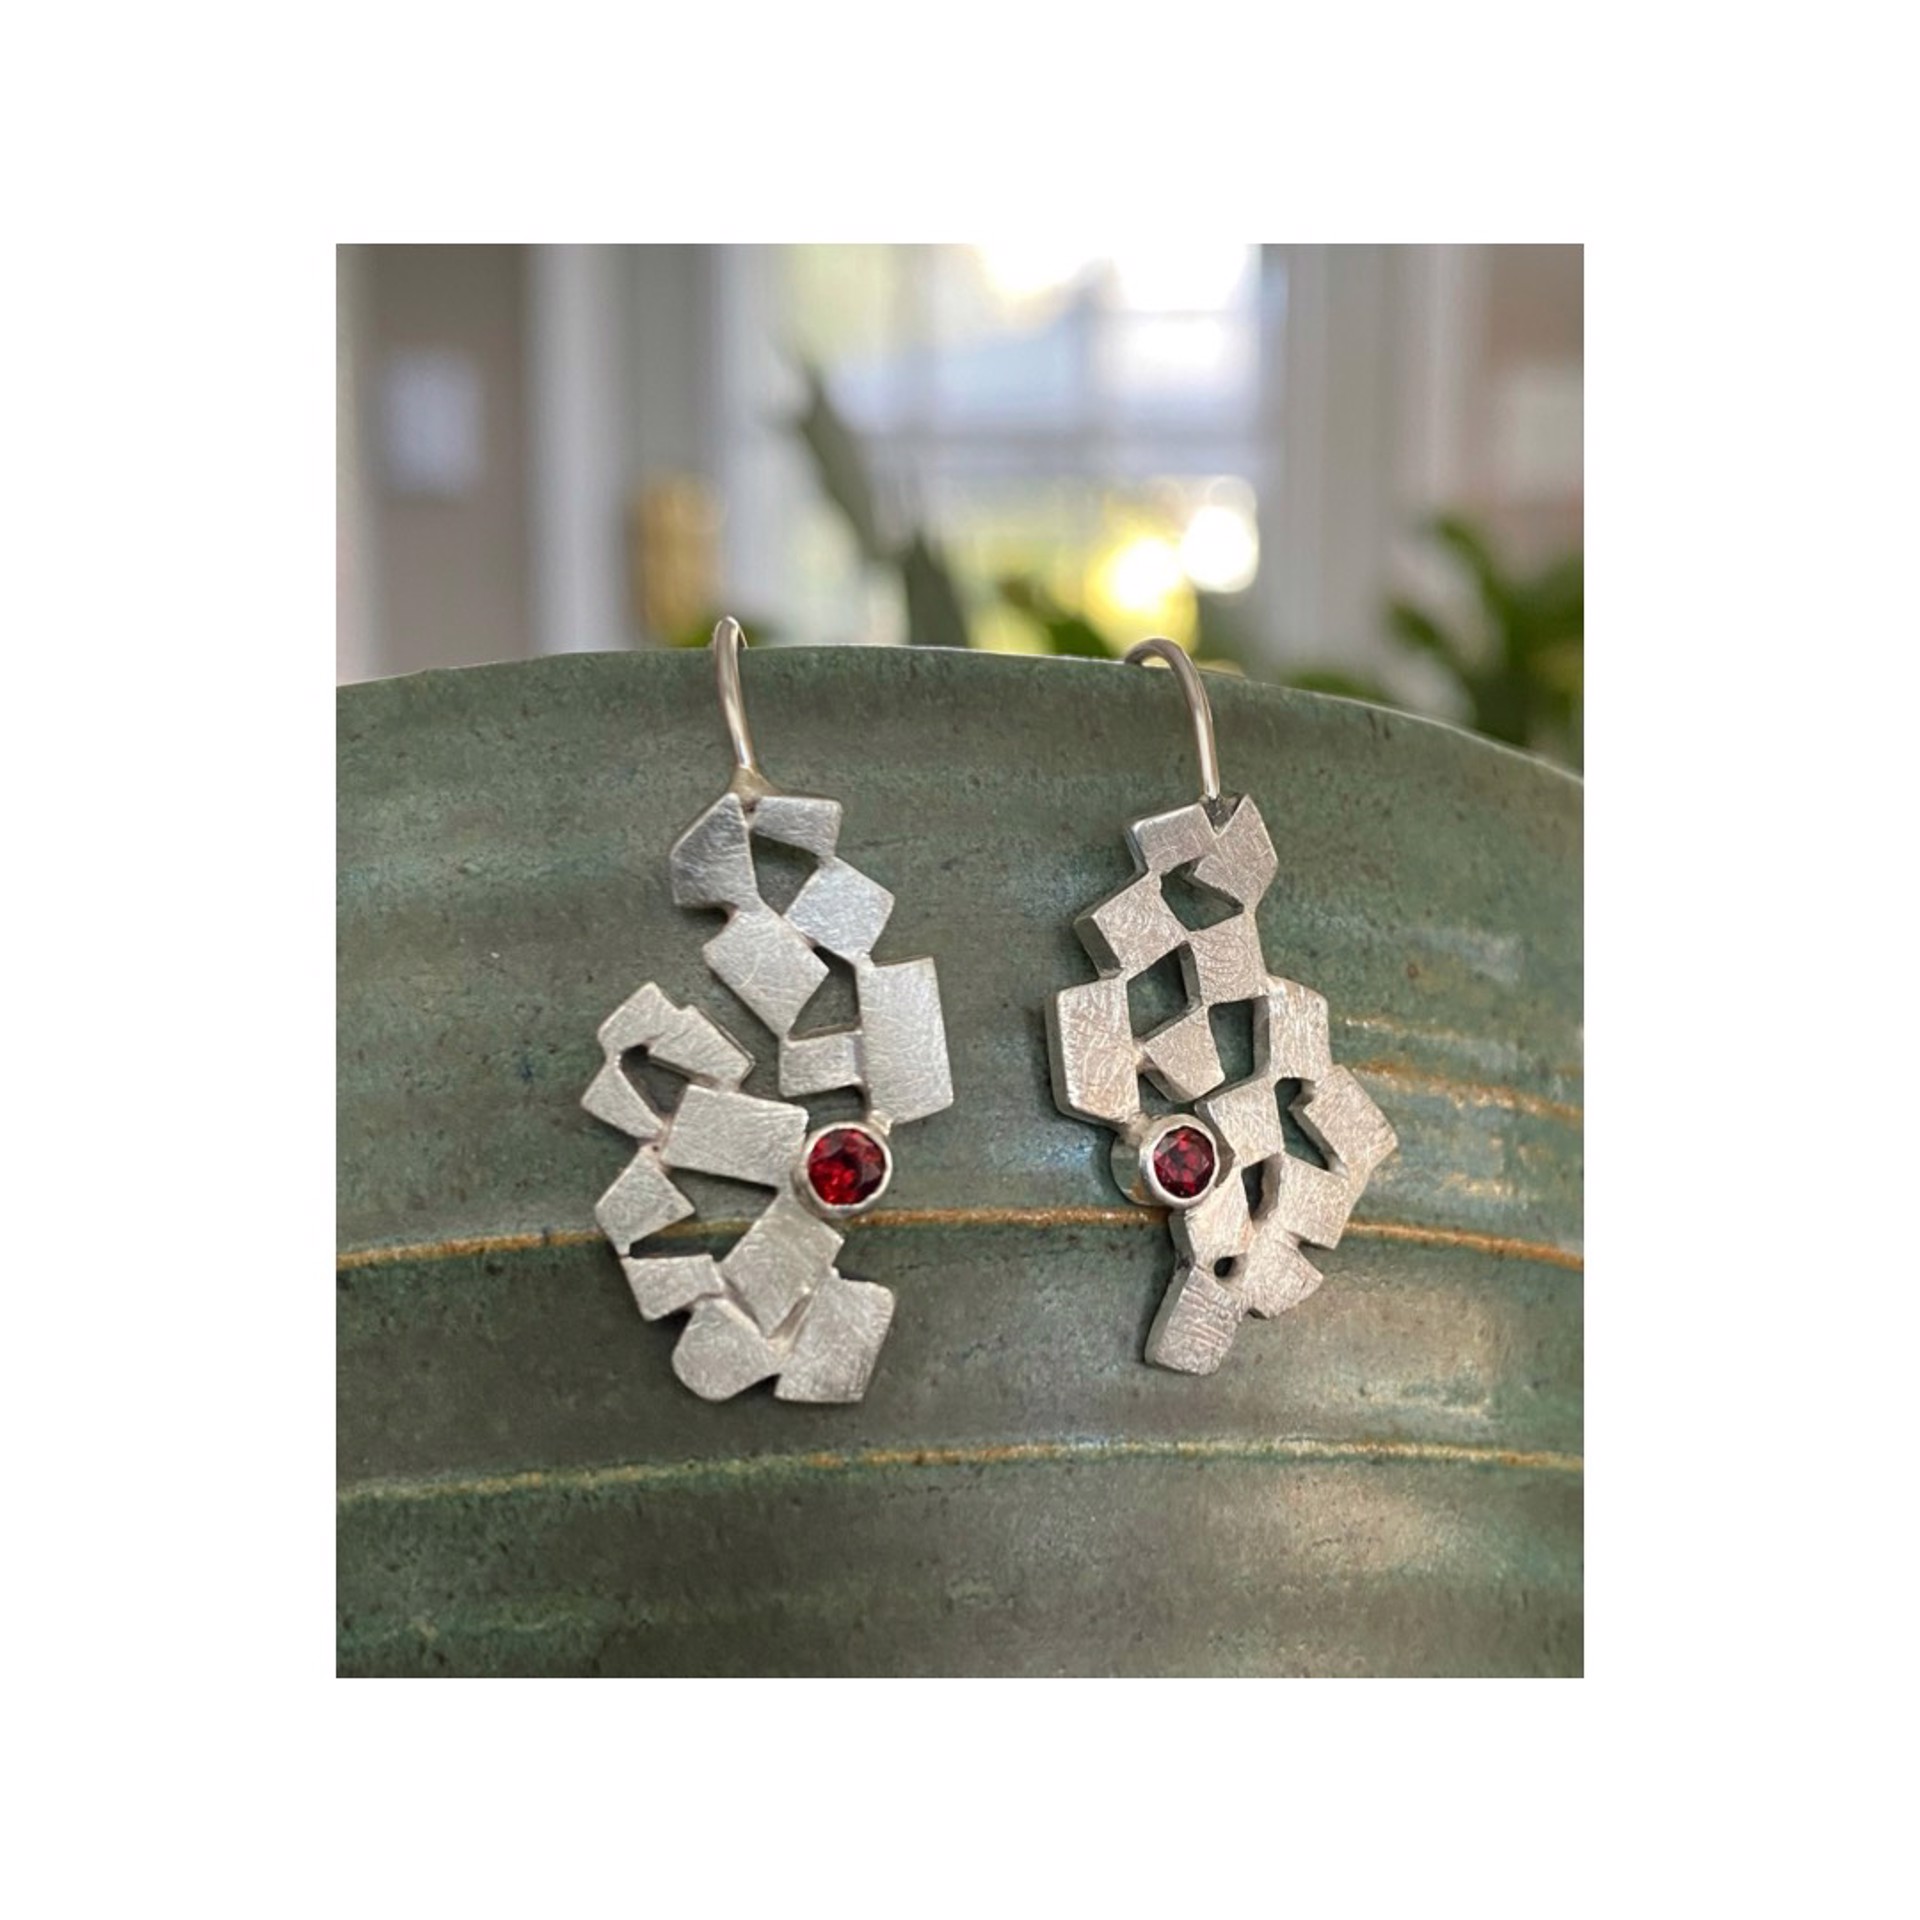 Earrings | Sterling and Garnet by Amy Shady